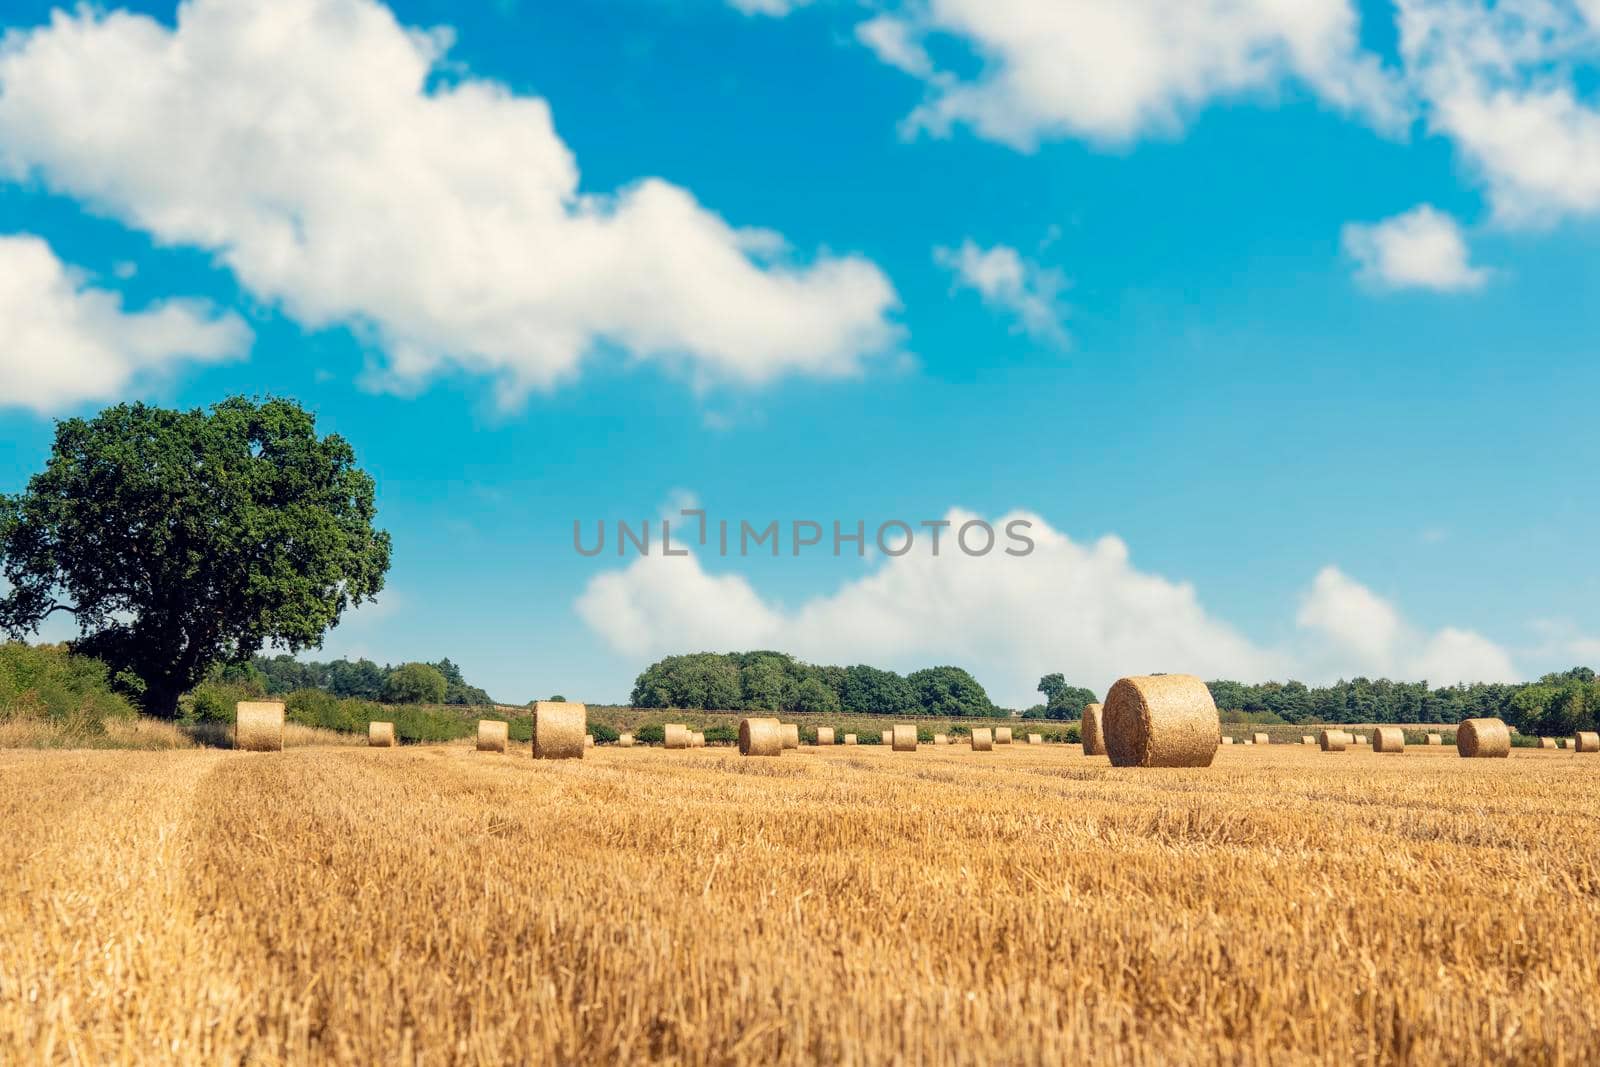 Hay bale and straw in the field. English Rural landscape. Wheat yellow golden harvest in summer. Countryside natural landscape. Grain crop, harvesting by Iryna_Melnyk